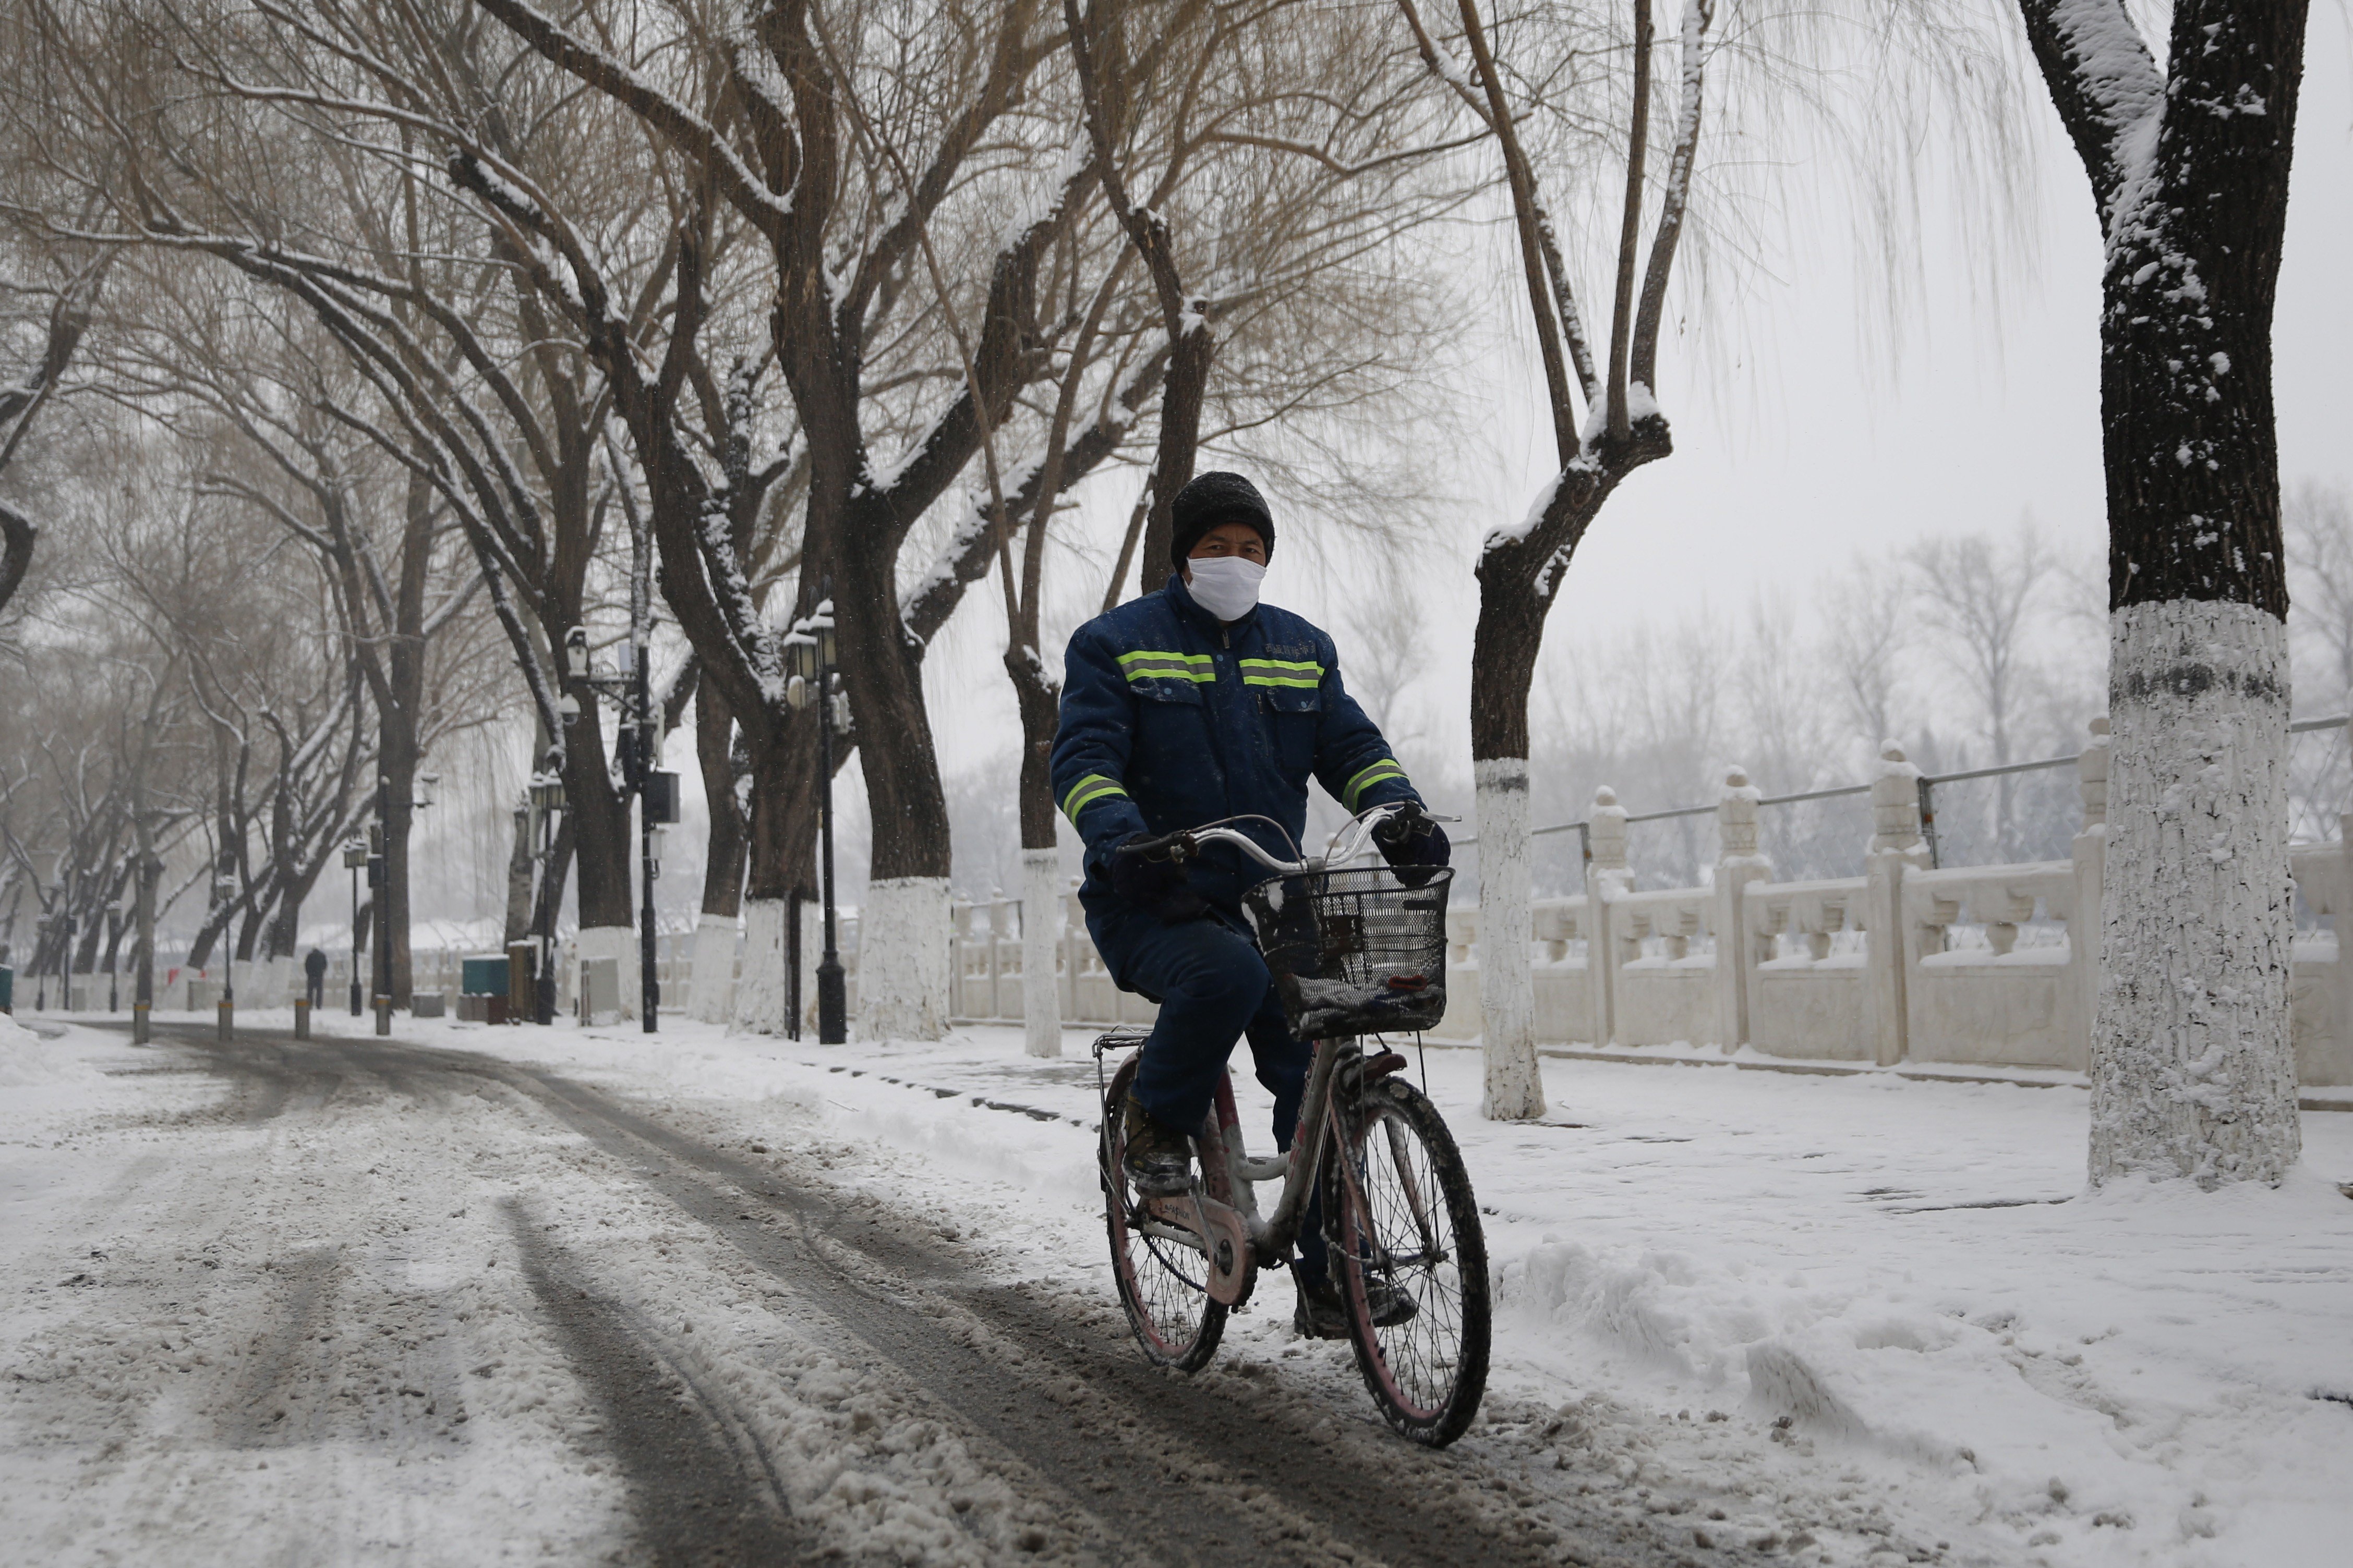 A Beijing cyclist wears a mask during a snowfall in the city on Thursday. Photo: EPA-EFE